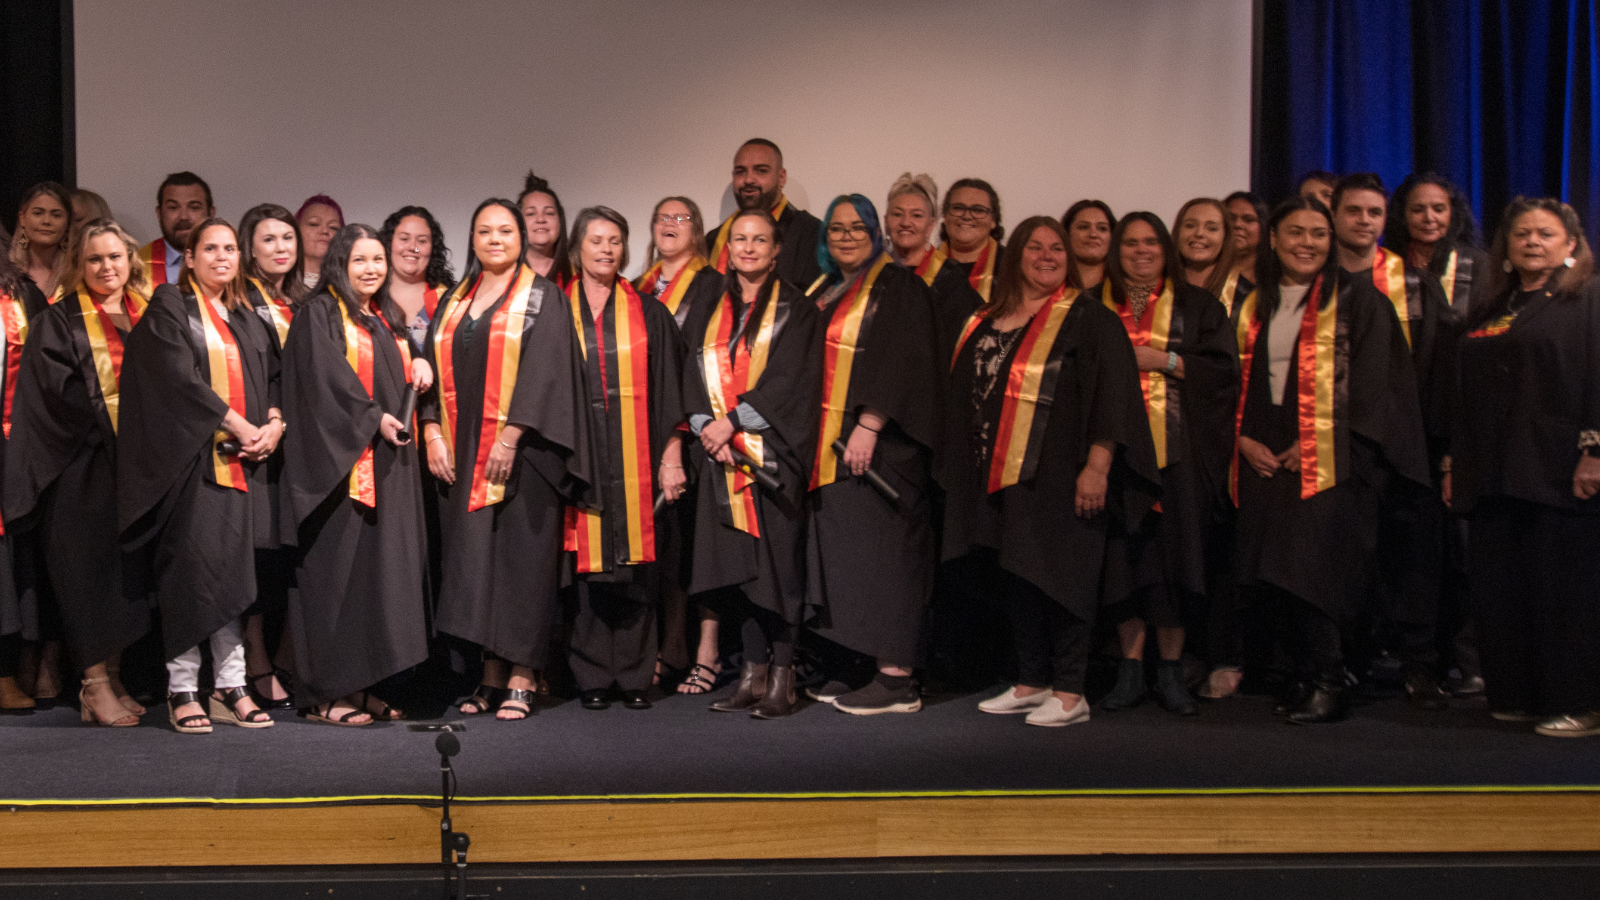 VACCHO praises RTO graduates – The future of Aboriginal health and wellbeing 